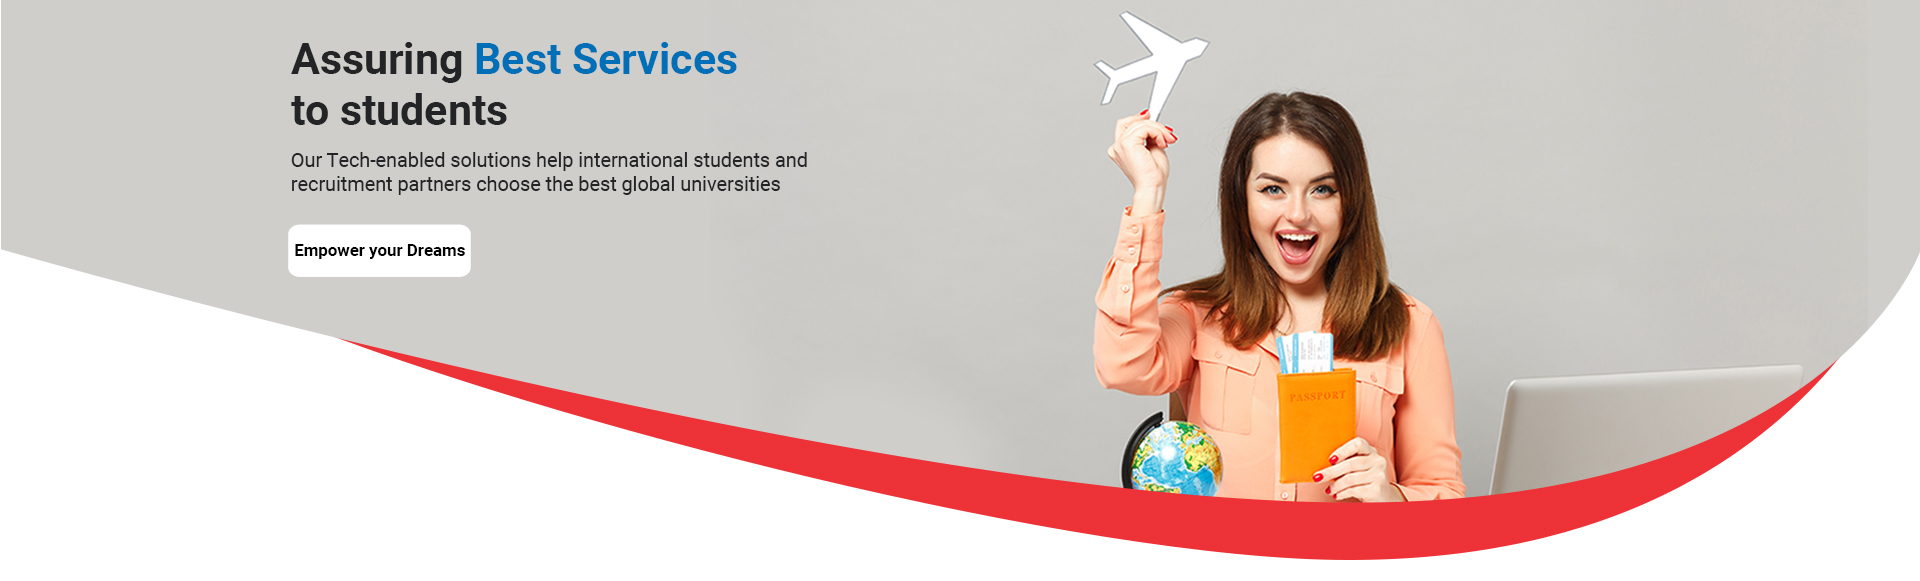 Assuring Best Services to students